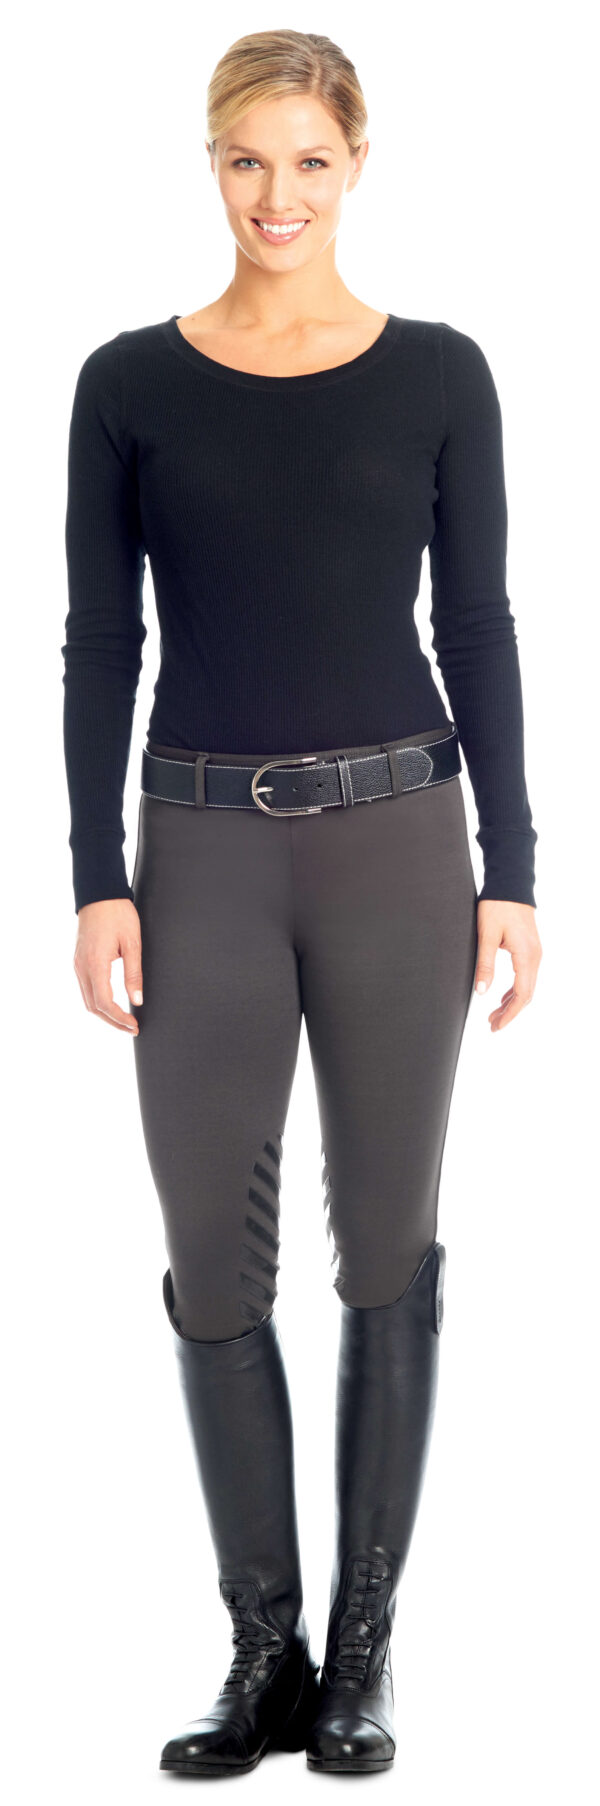 Ovation Winter Silicone Knee Patch Breech